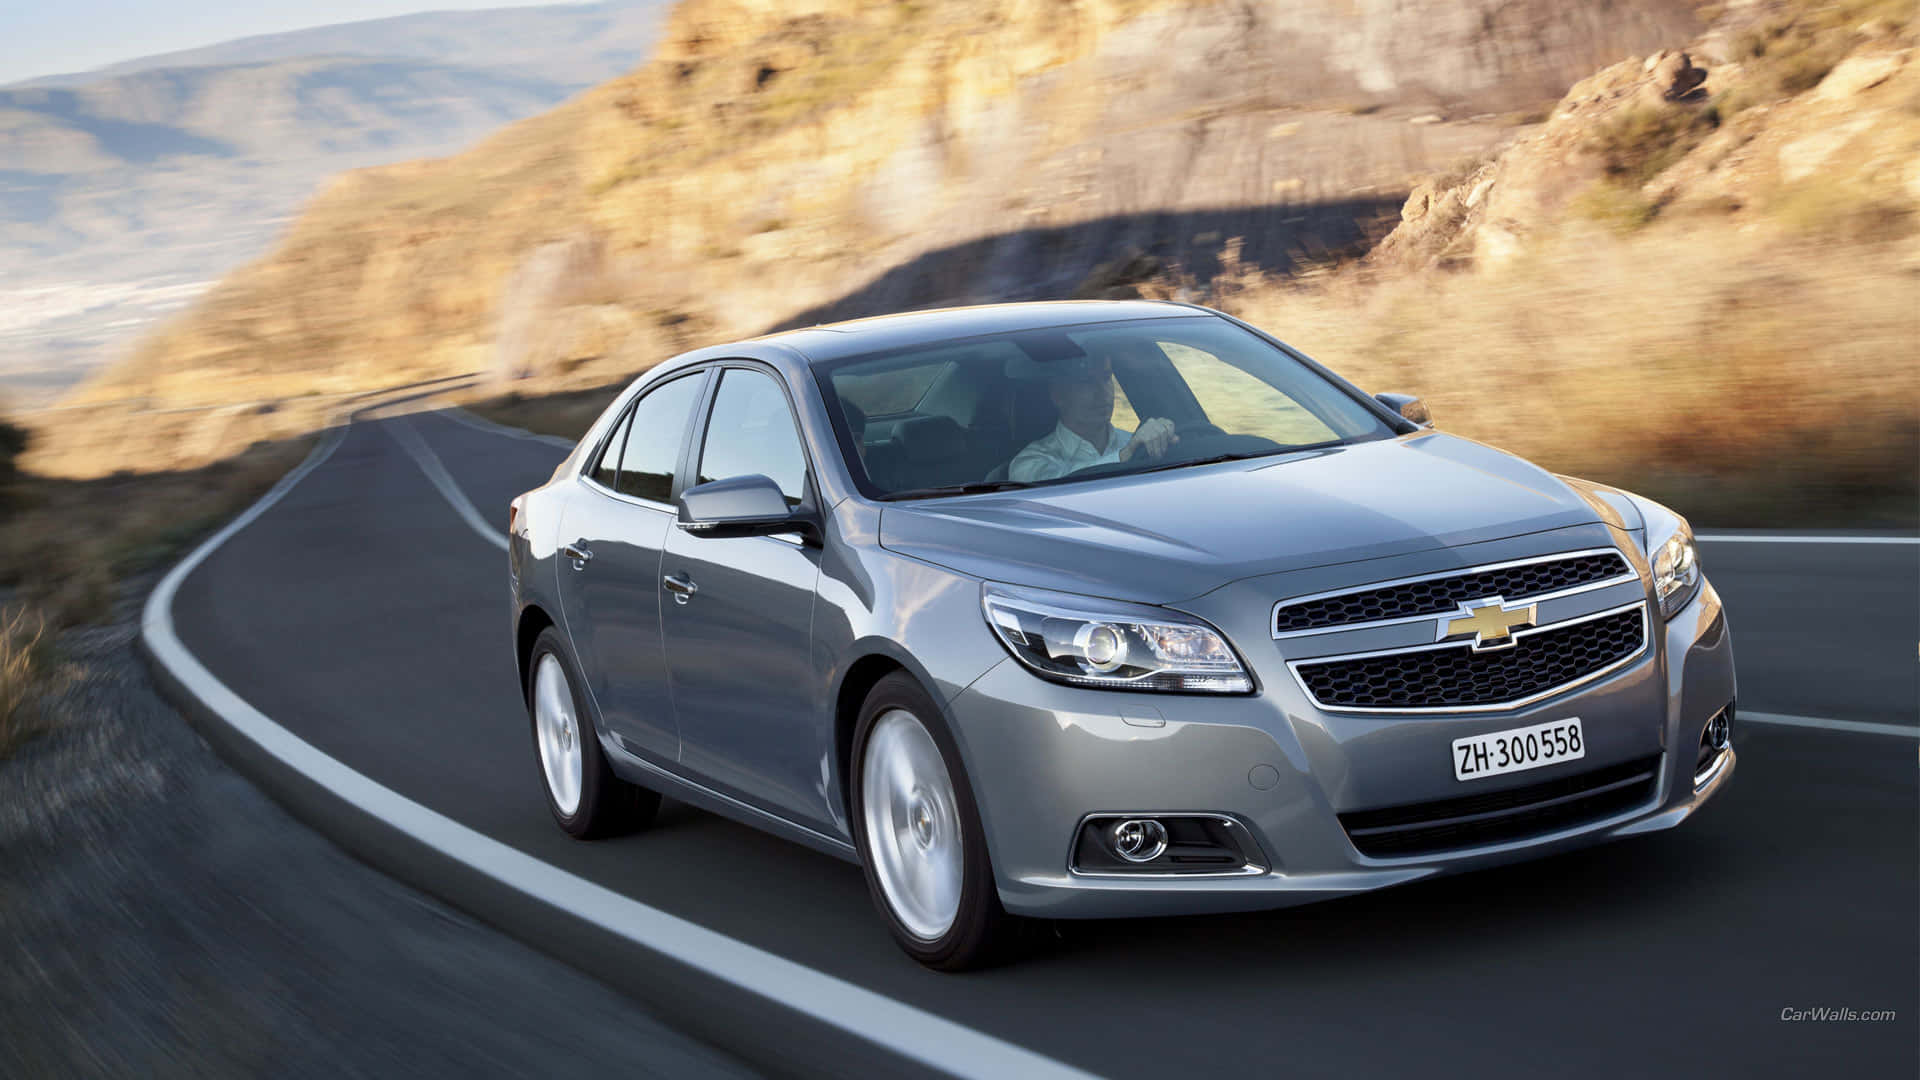 Classic Style and Sophistication – The Chevy Malibu Wallpaper